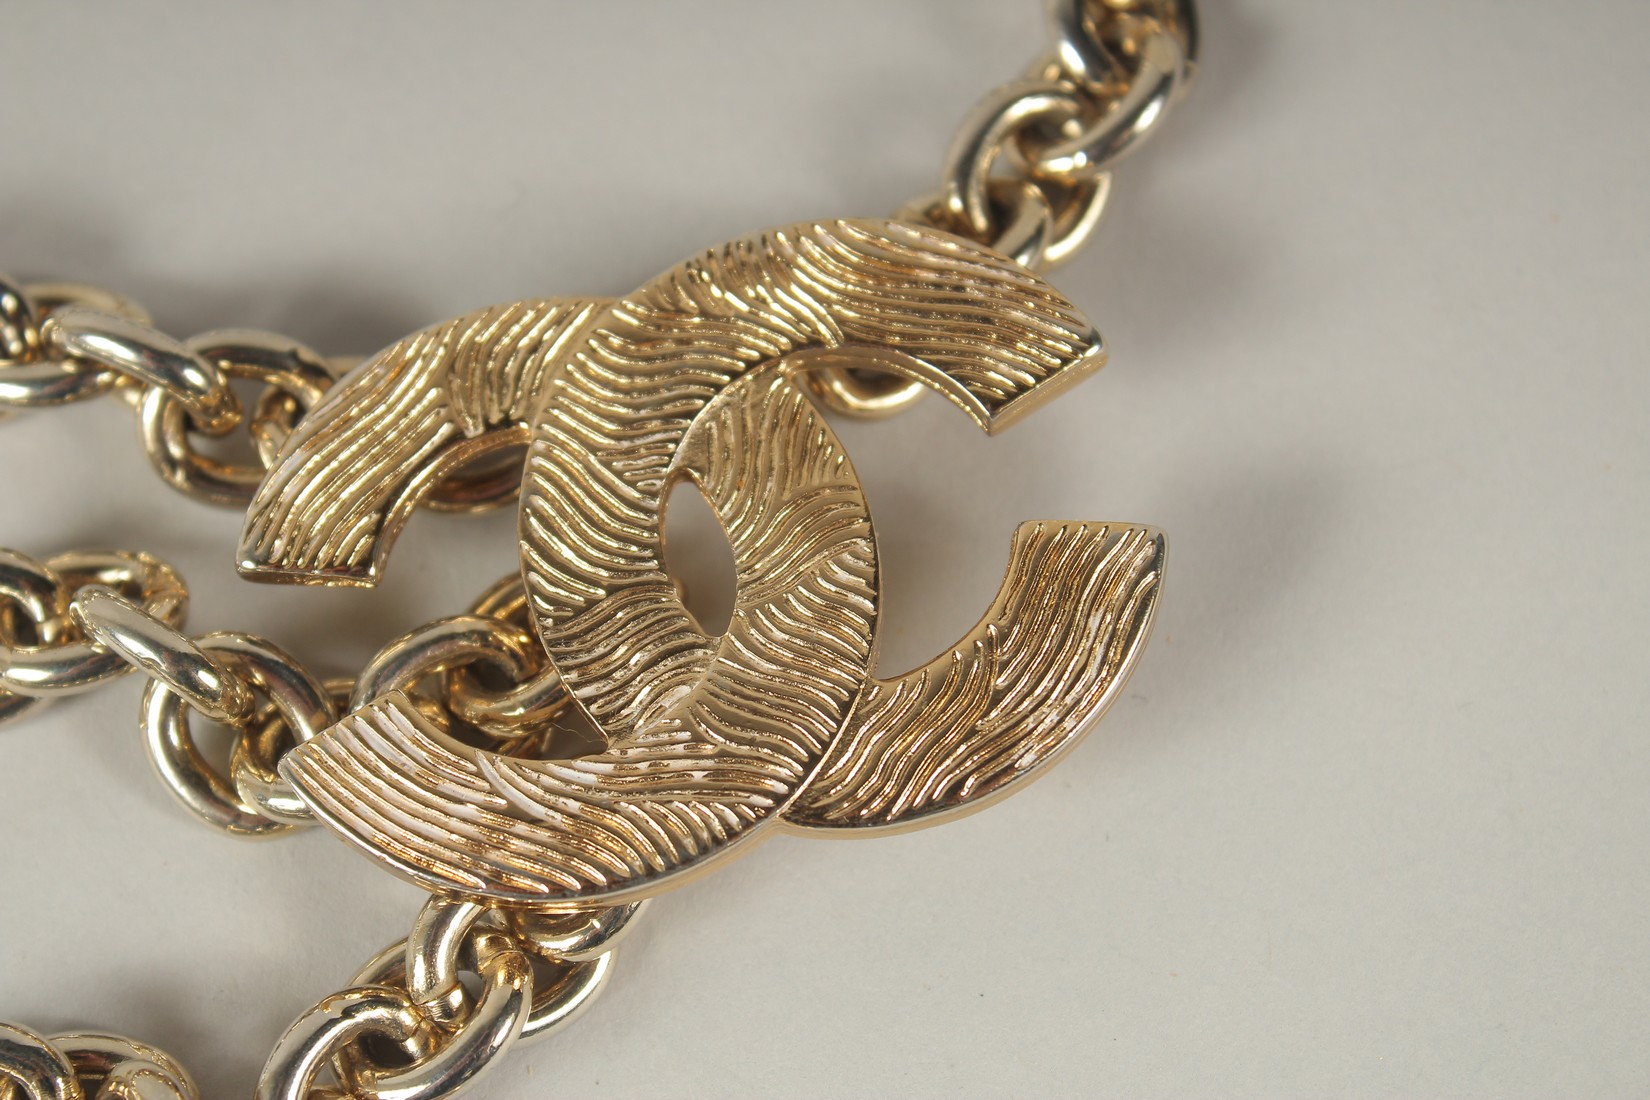 A LONG CHANEL GILT BELT with pendant and tie, double C emblem. 110cms long. - Image 3 of 9